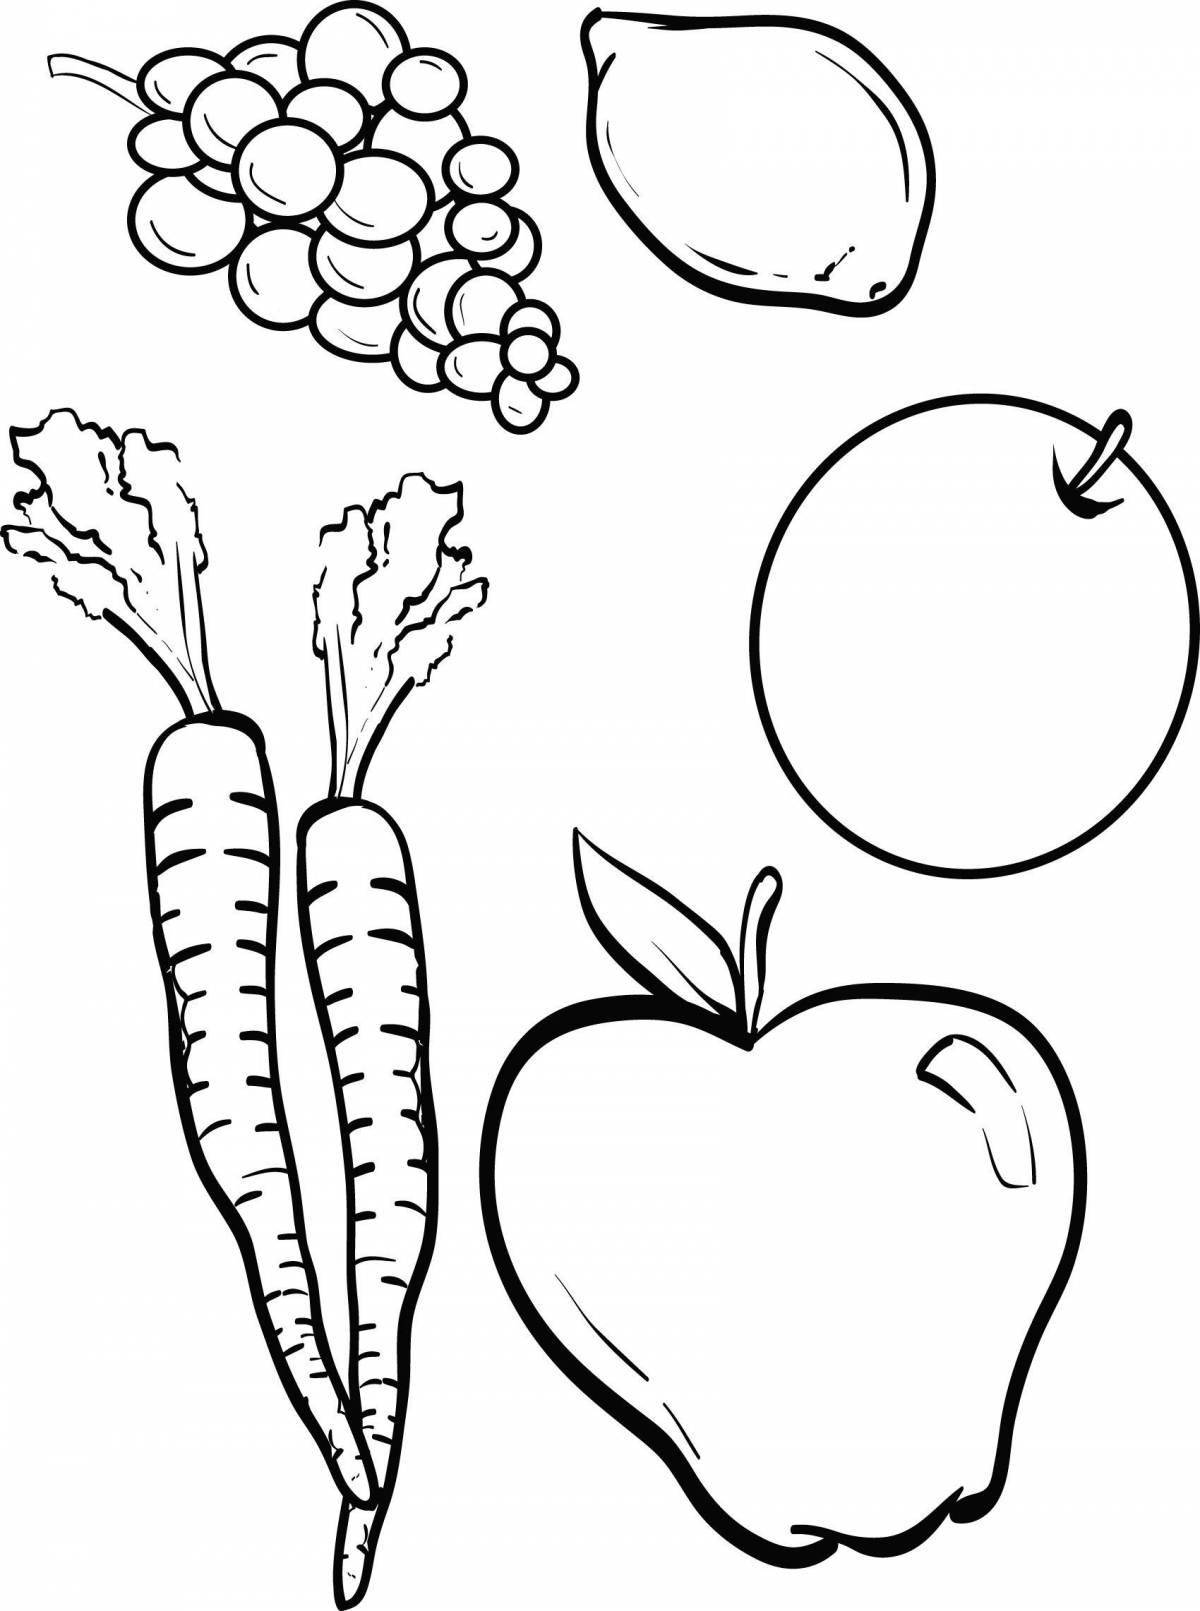 Nutritious food coloring book for 5-6 year olds